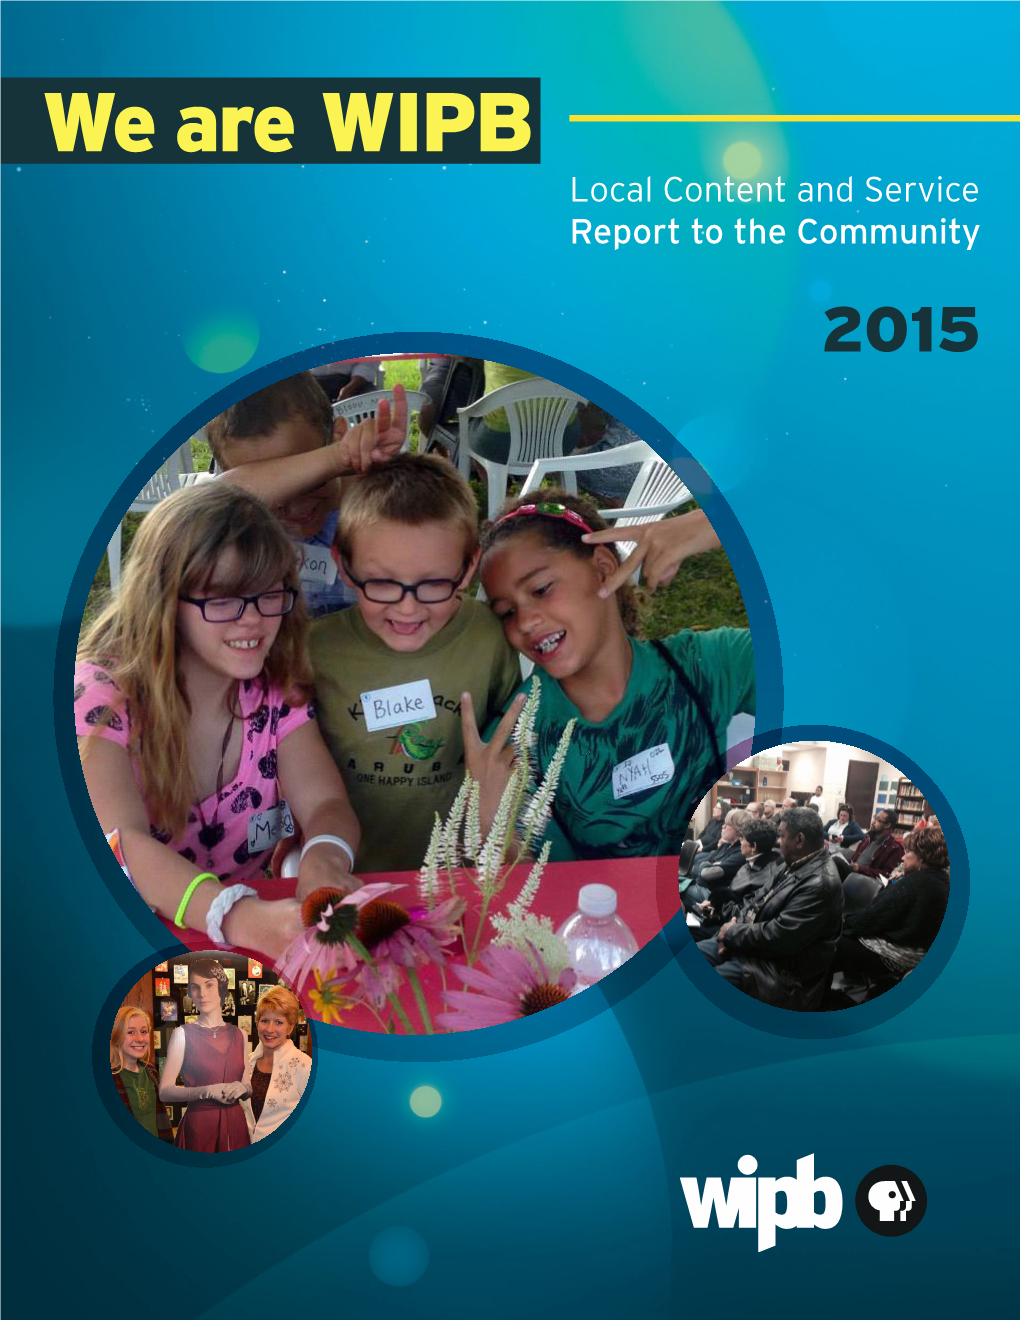 We Are WIPB Local Content and Service Report to the Community 2015